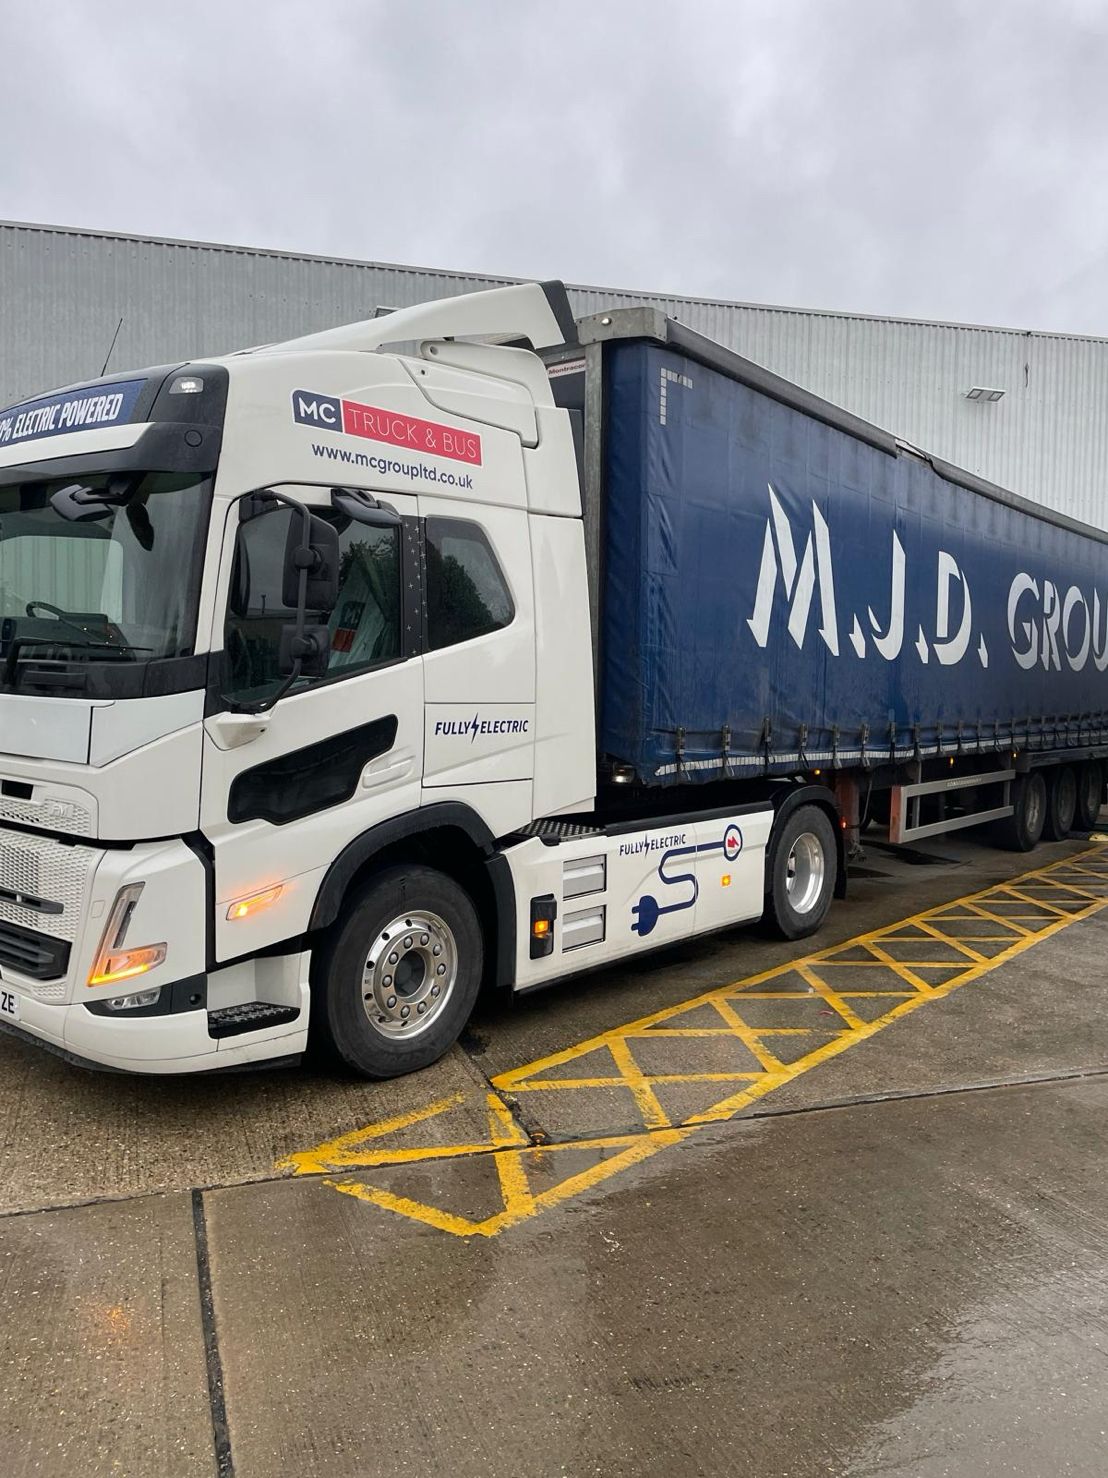 Exciting news, MJD are trialing an electric vehicle! 🚛